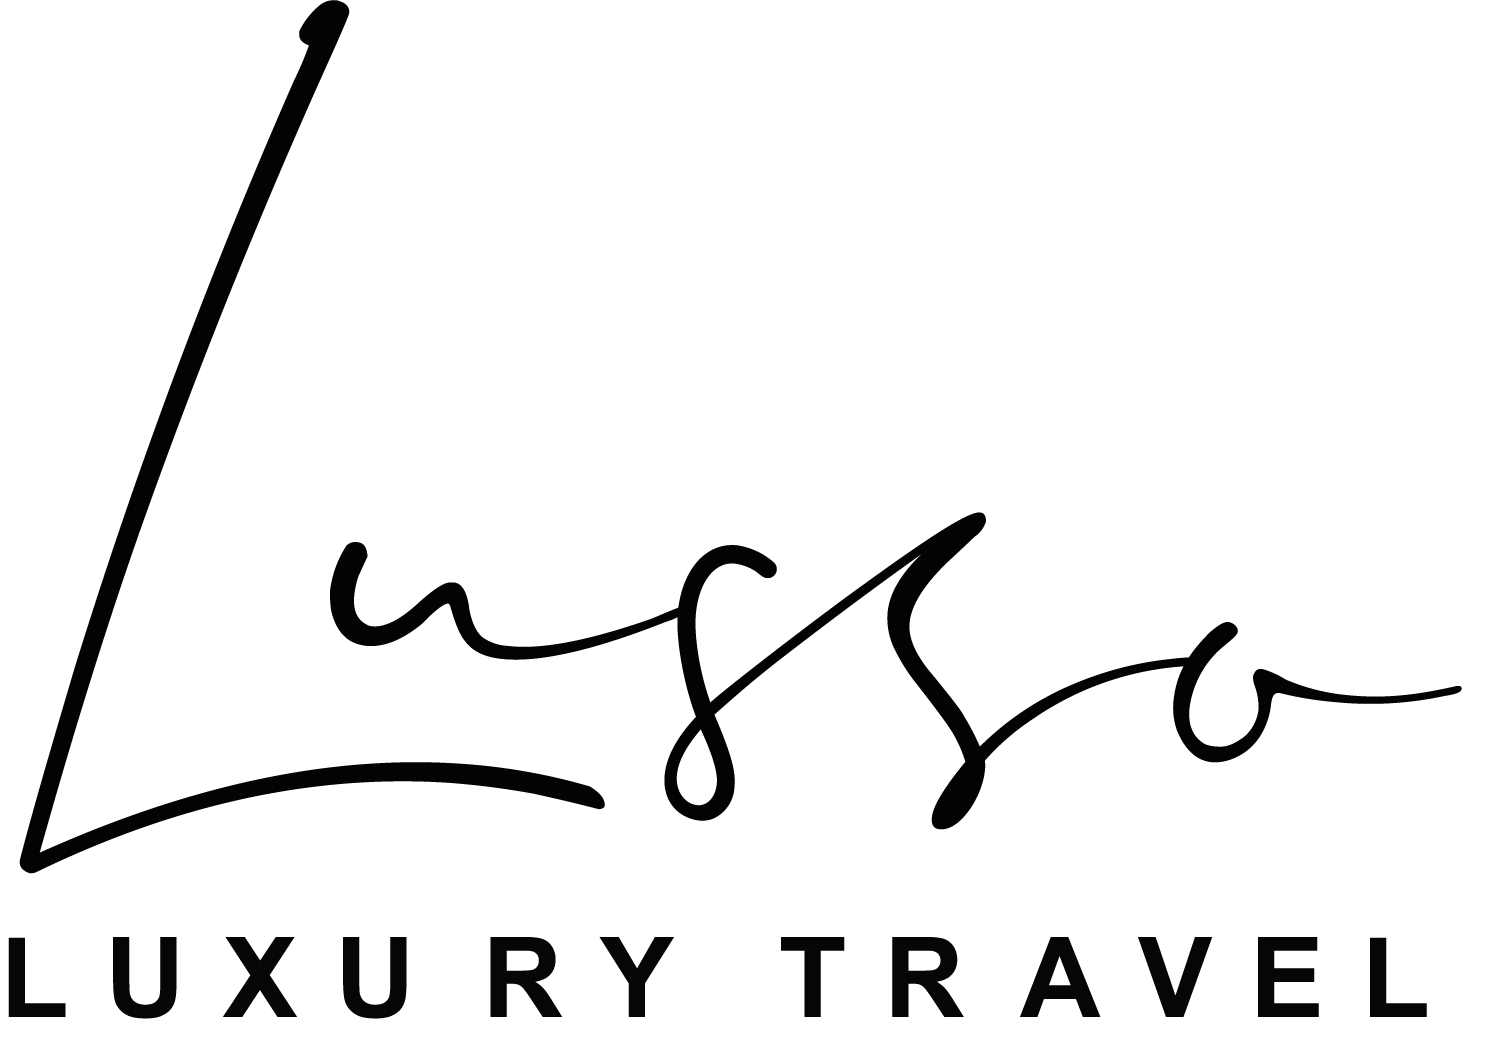 lusso travel agency